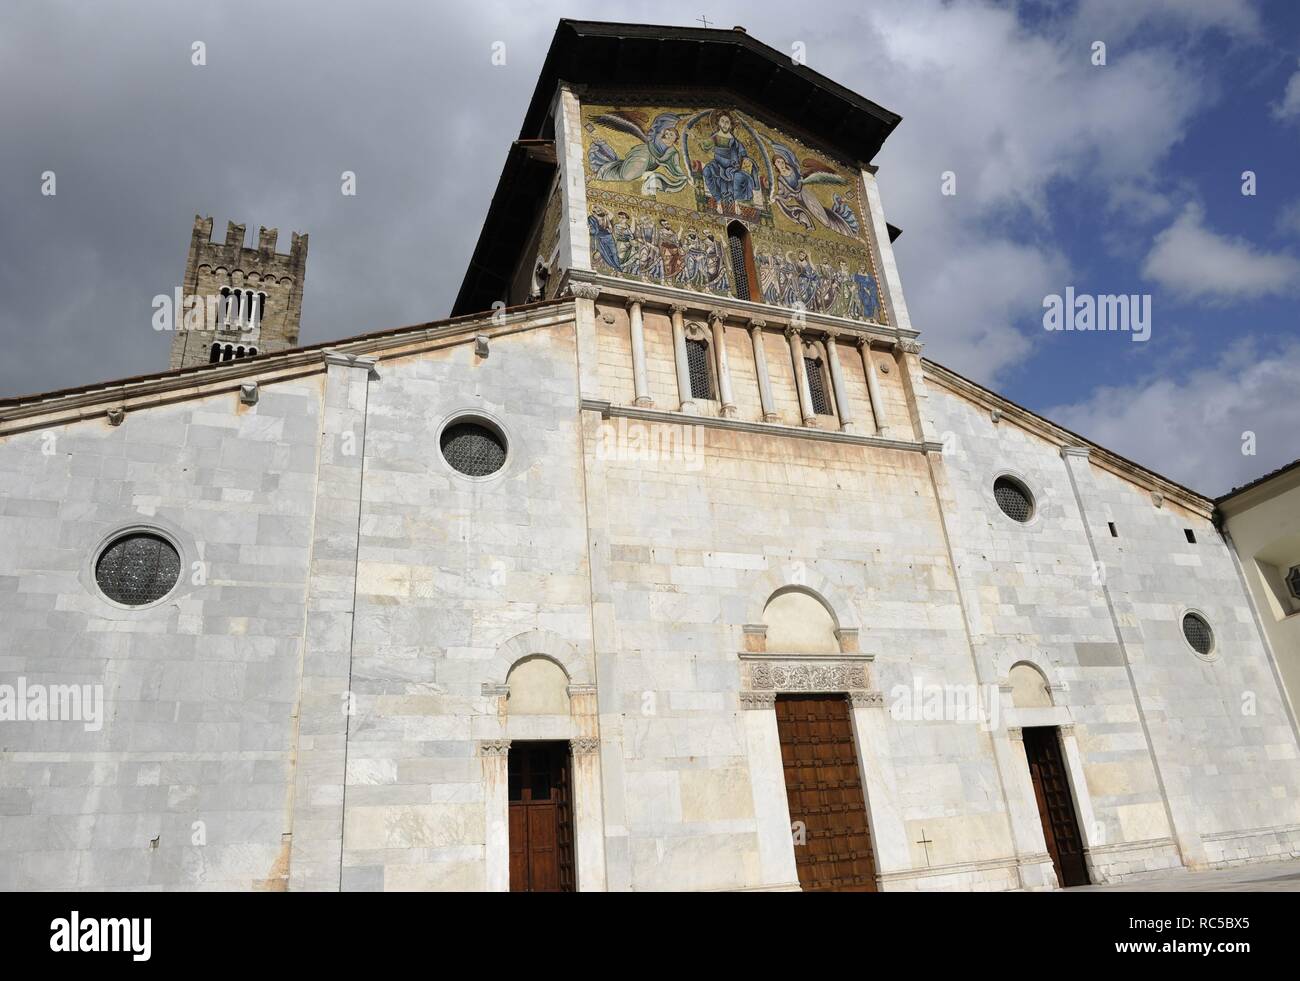 Italy. Lucca. Basilica of San Frediano. Facade with mosaic depicting The Ascension of Christ designed by Berlinghiero Berlinghieri (13th century). Stock Photo